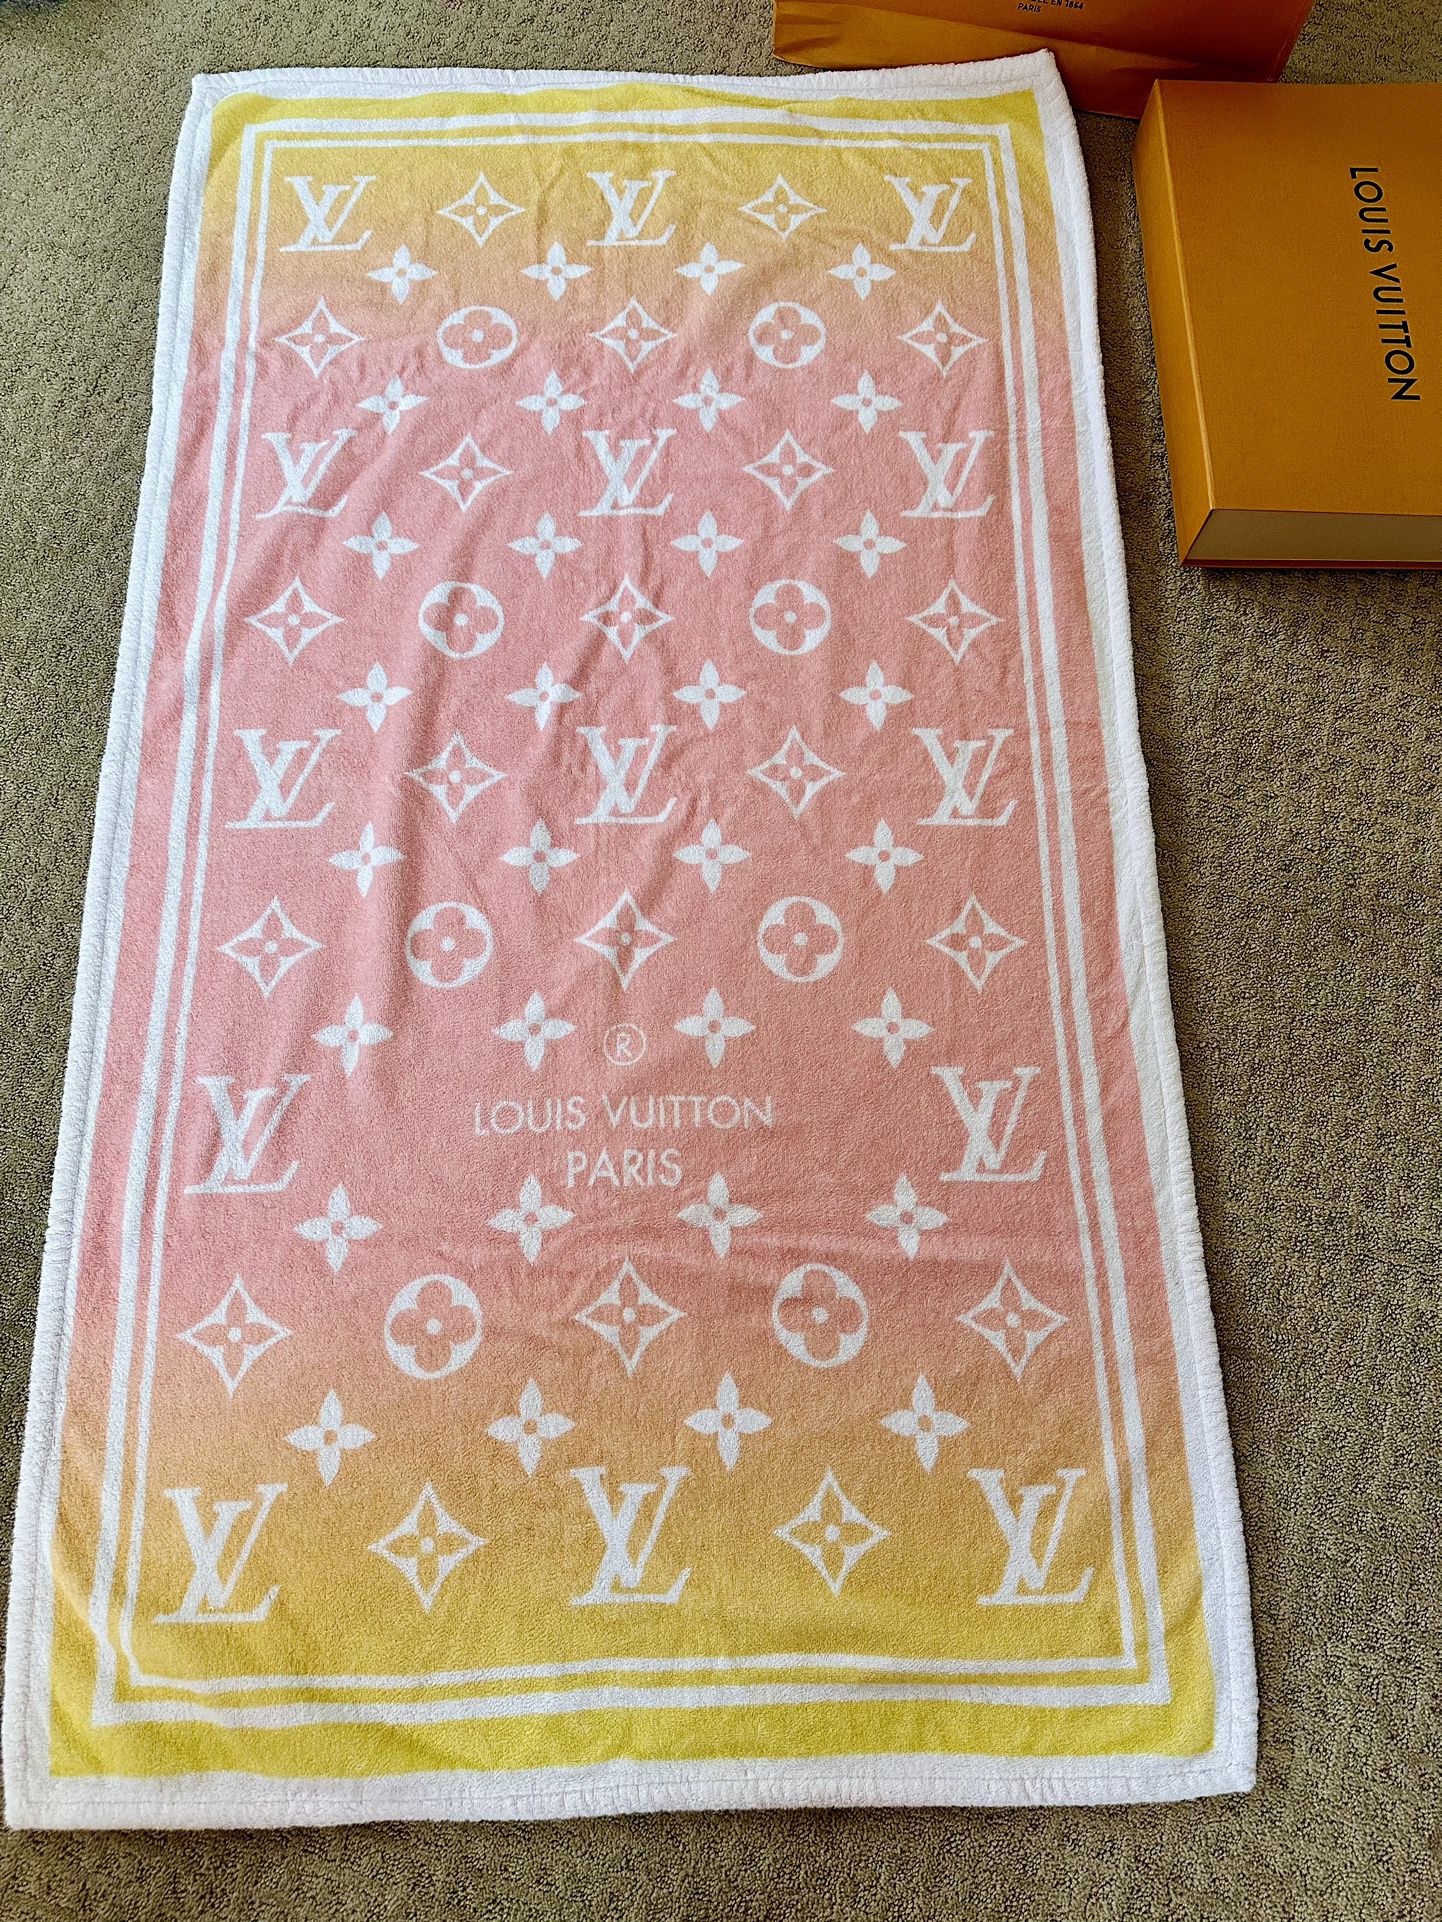 Louis Vuitton Towel - 8 For Sale on 1stDibs